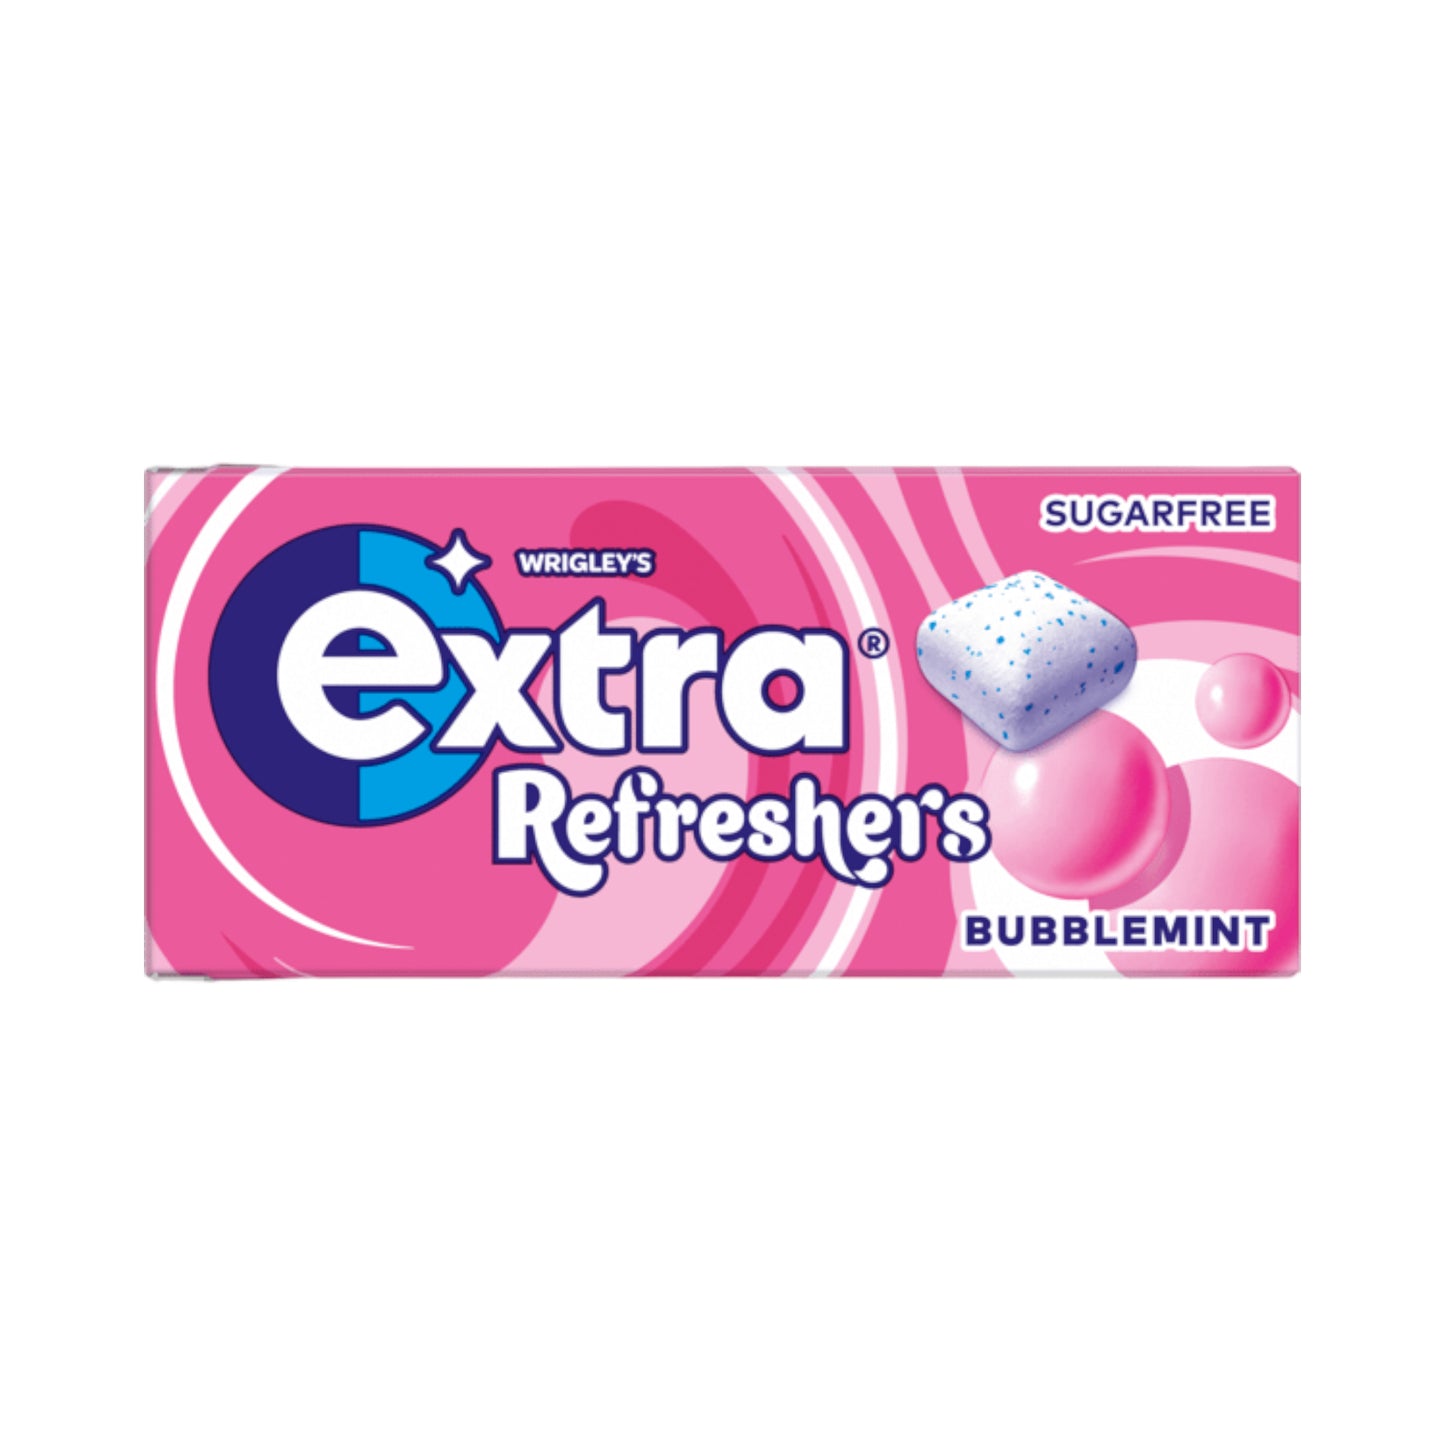 Extra Refreshers Bubblemint Sugarfree Chewing Gum Handy Box 7 Pieces - 15.6g